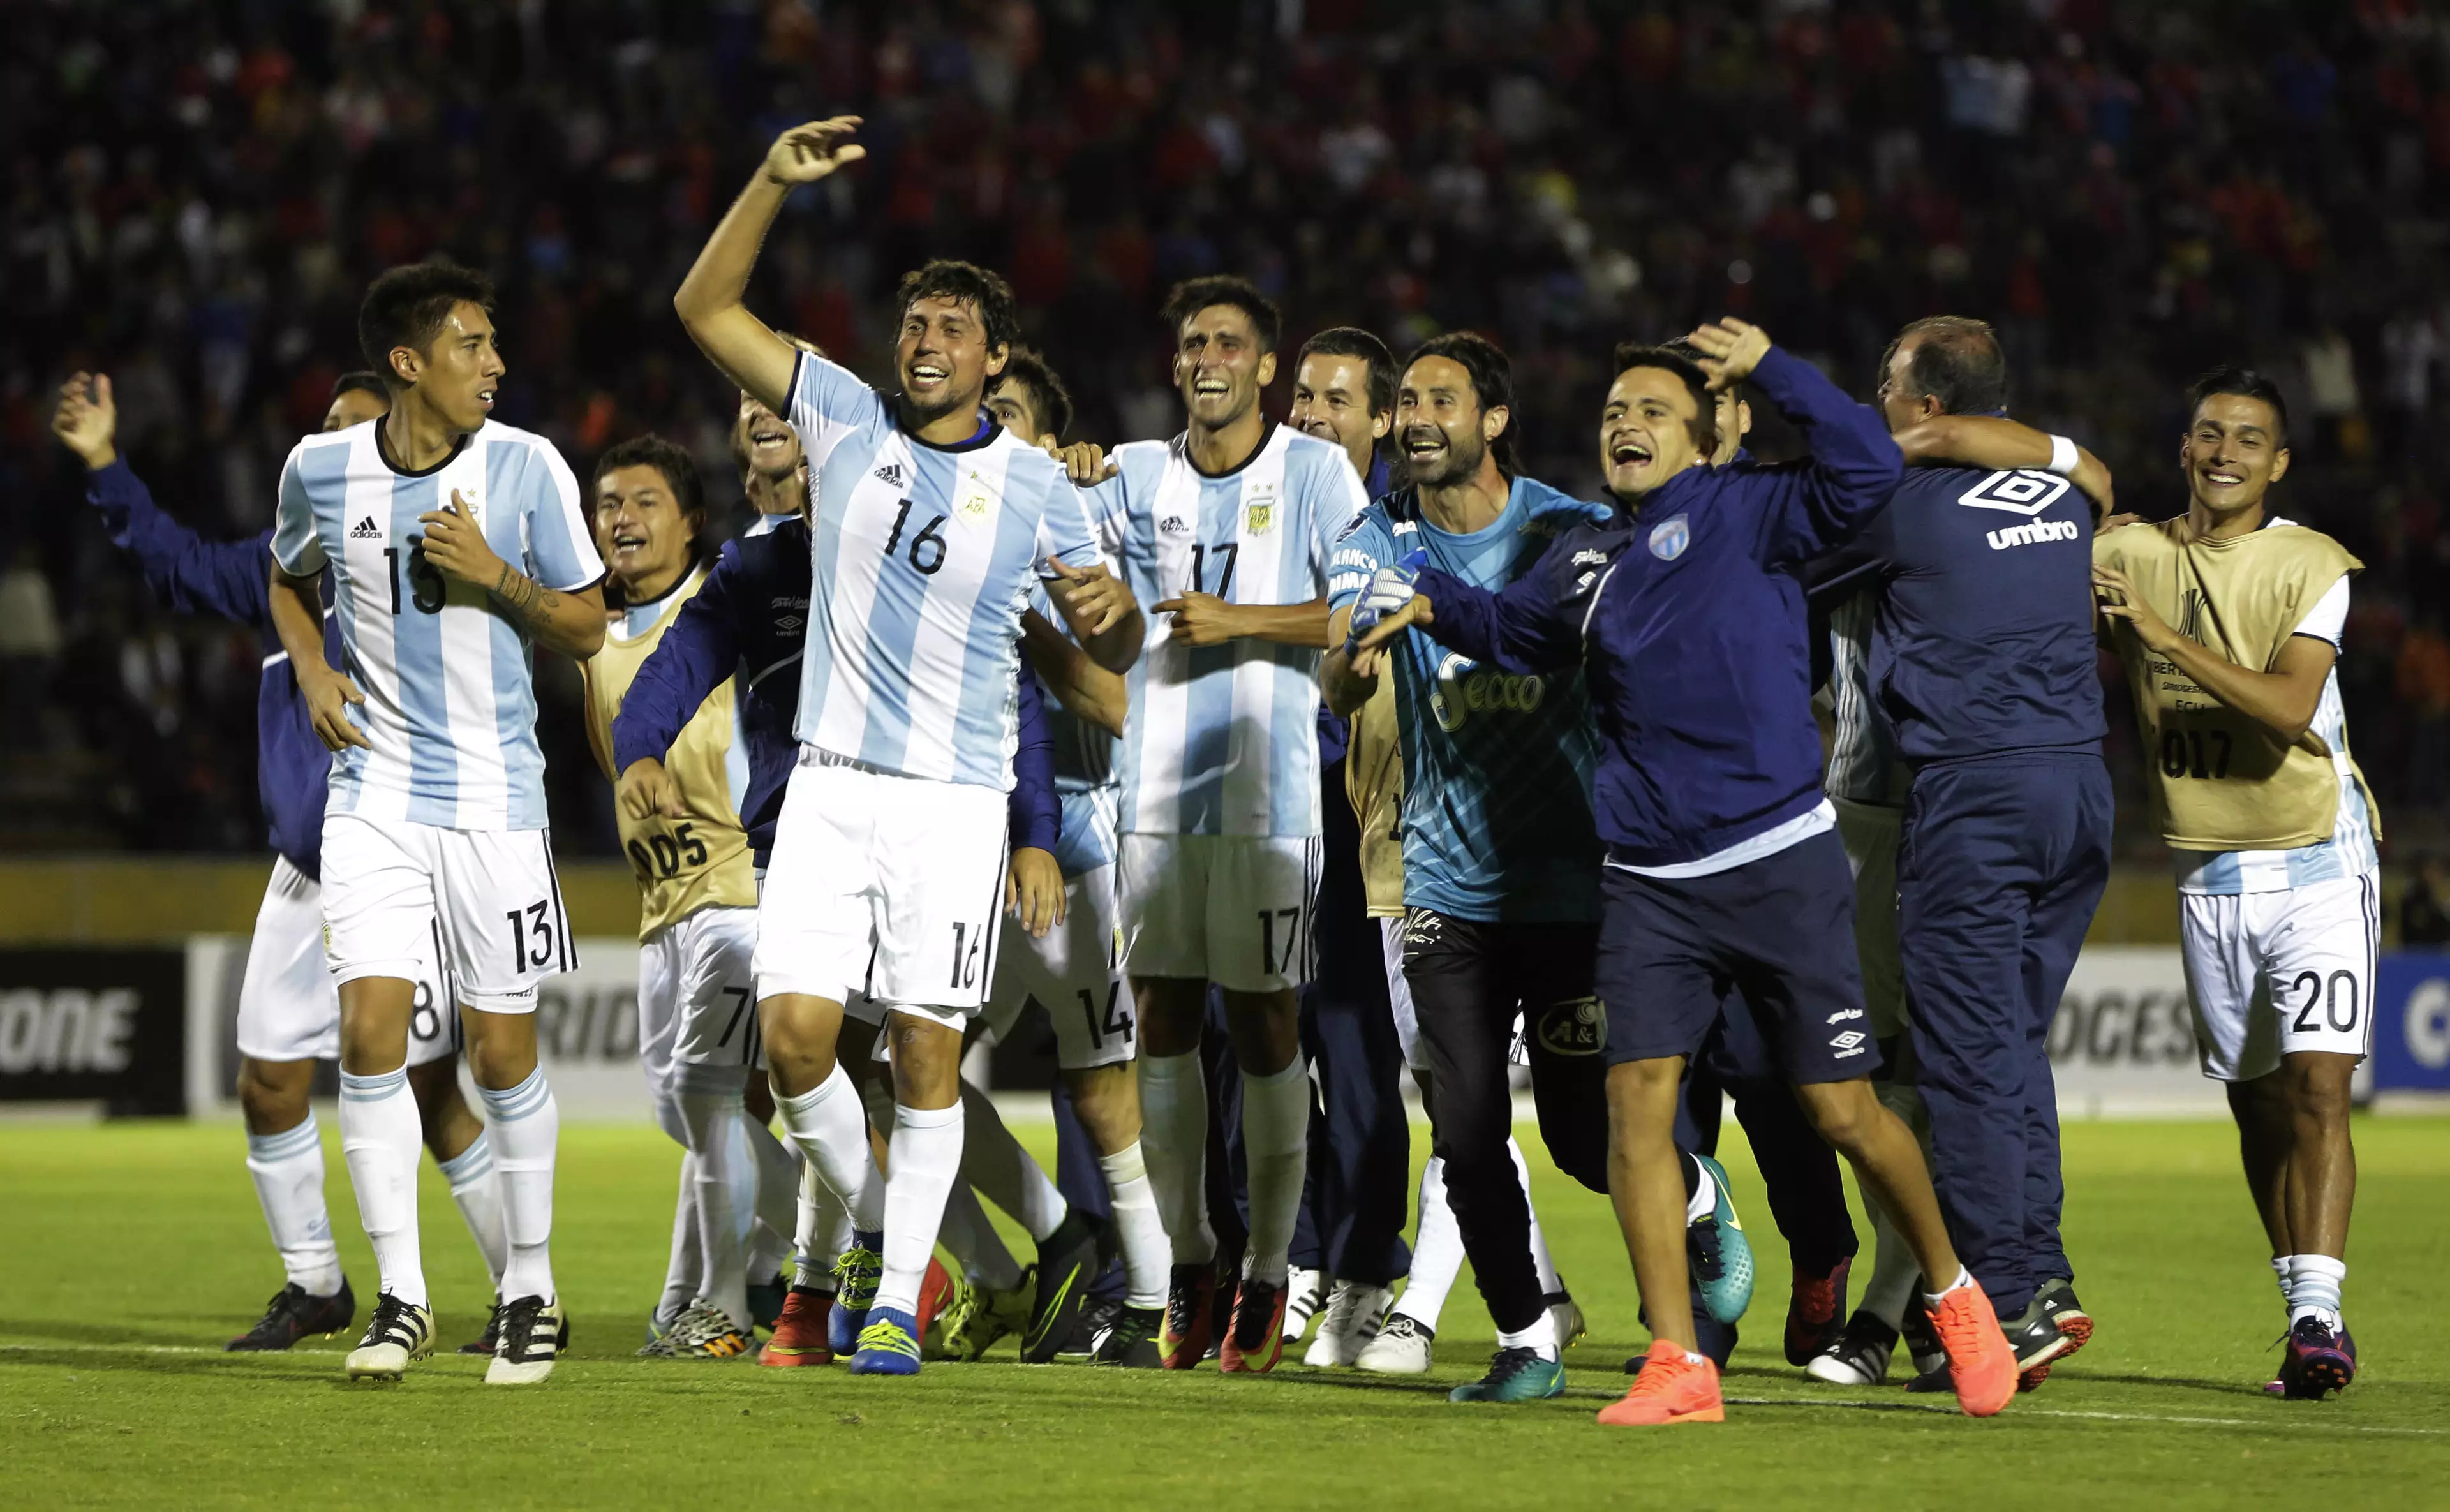 Atletico Tucuman's Incredible Copa Libertadores Match Is A Thing Of Fiction